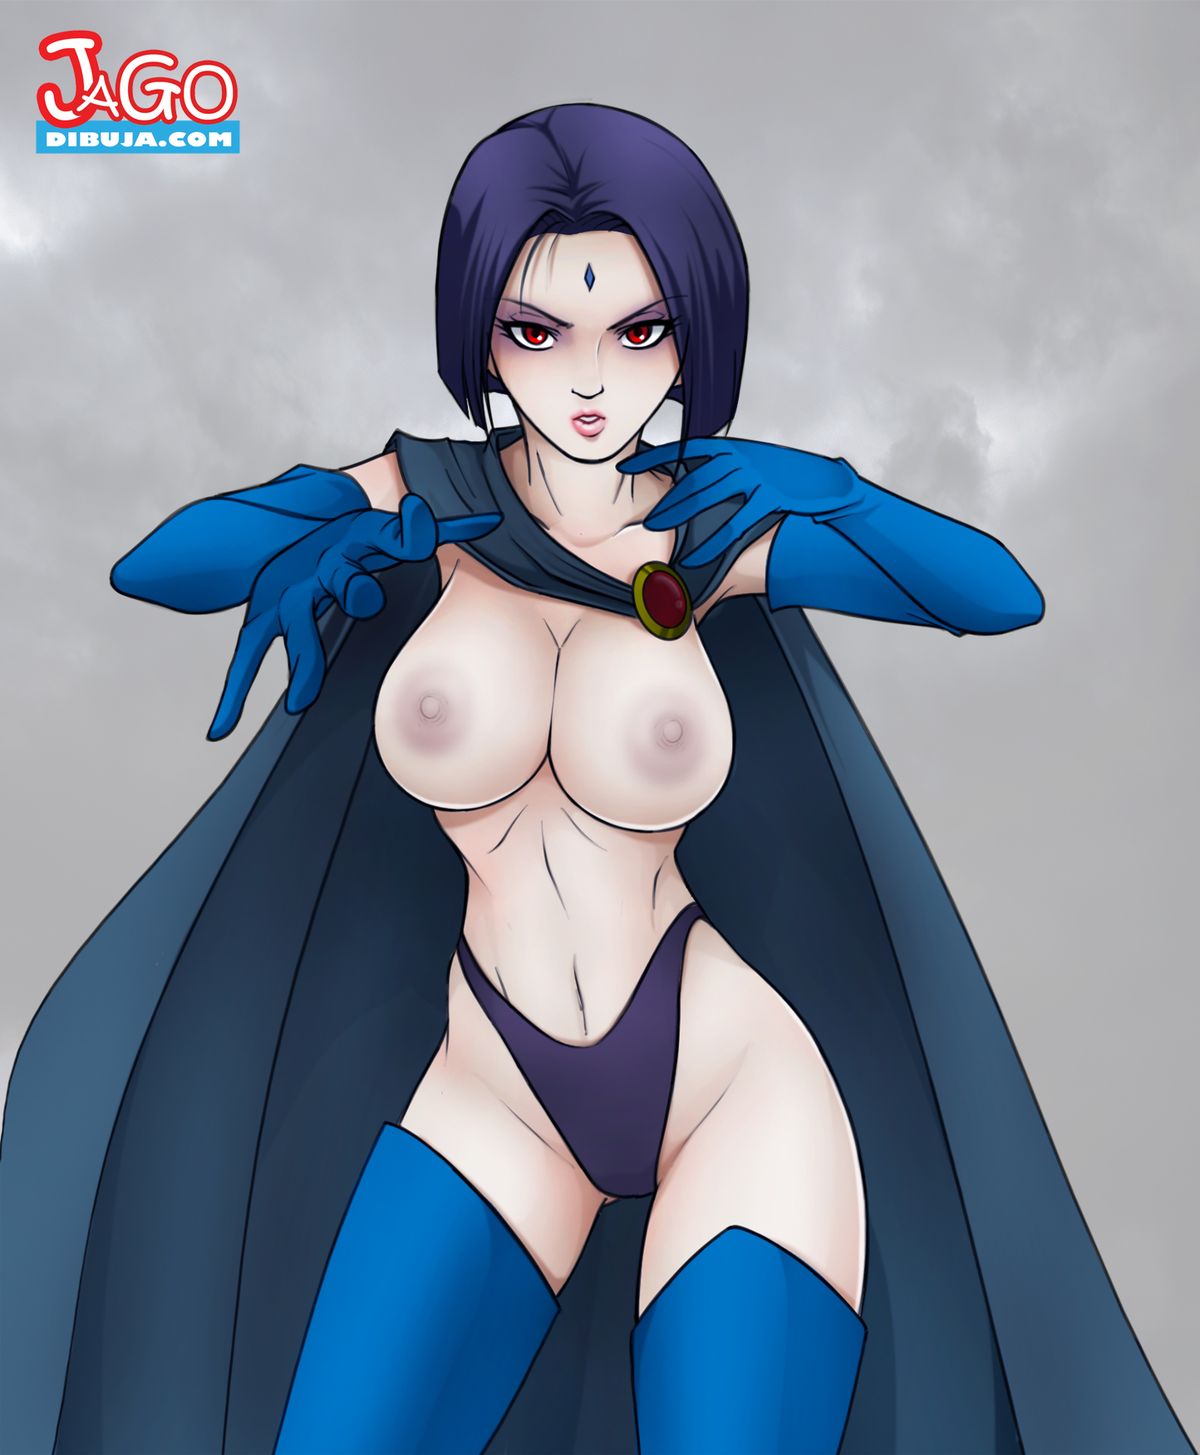 breasts flashing jago_(artist) nipples outfit raven_(dc) teen_titans